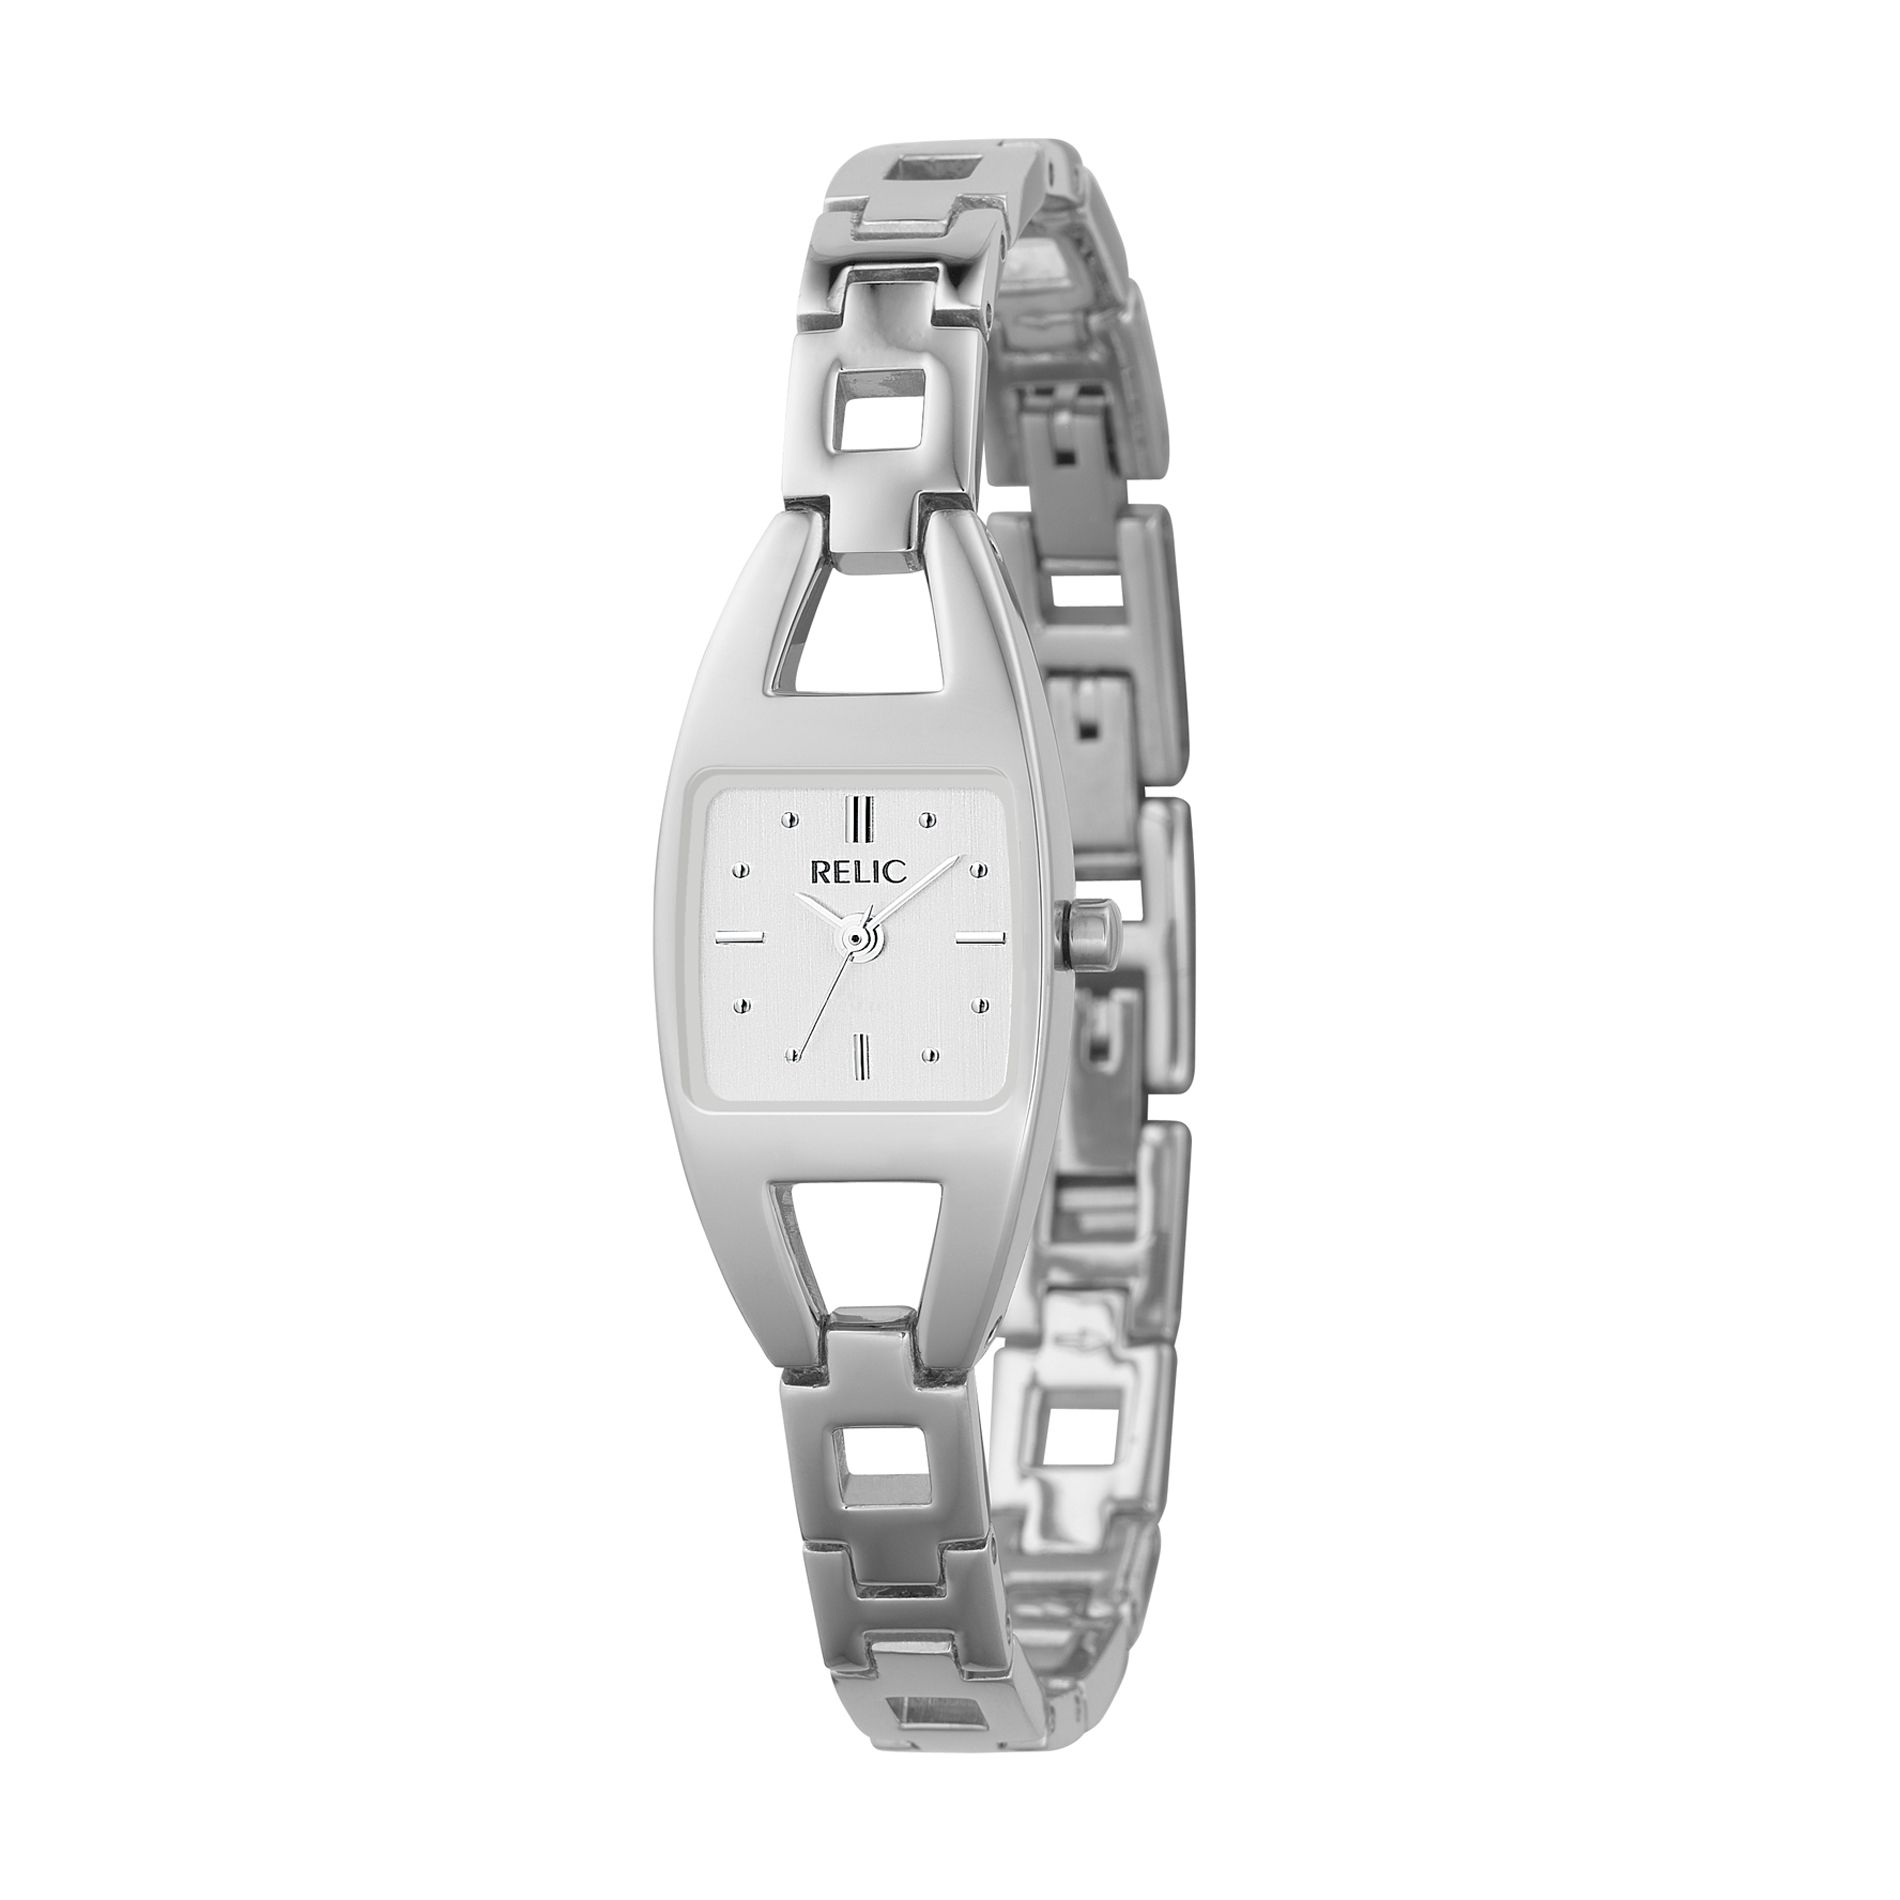 UPC 703357046201 product image for Ladies Watch with Silvertone Case, White Dial and Silvertone Bangle Band | upcitemdb.com